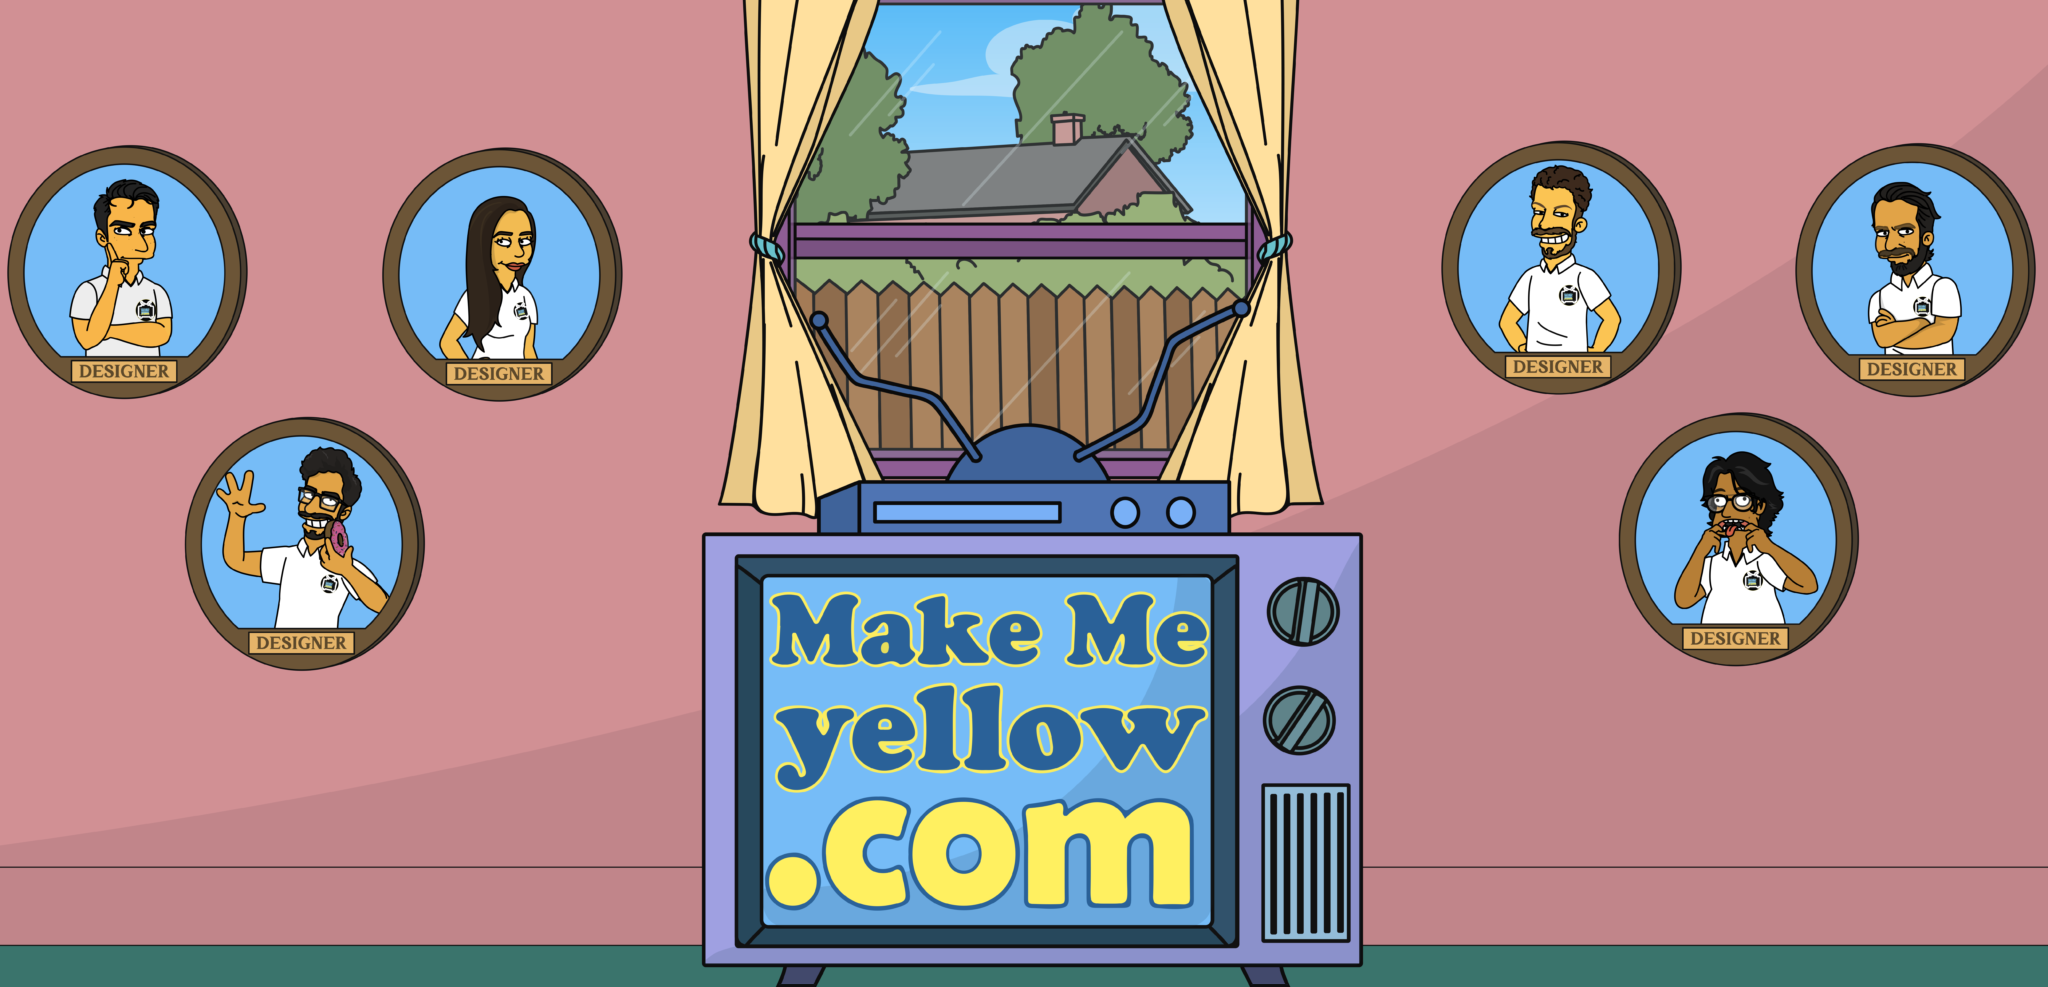 BEST Simpson Maker Service in 2023 ⭐️ Make Me Yellow .COM